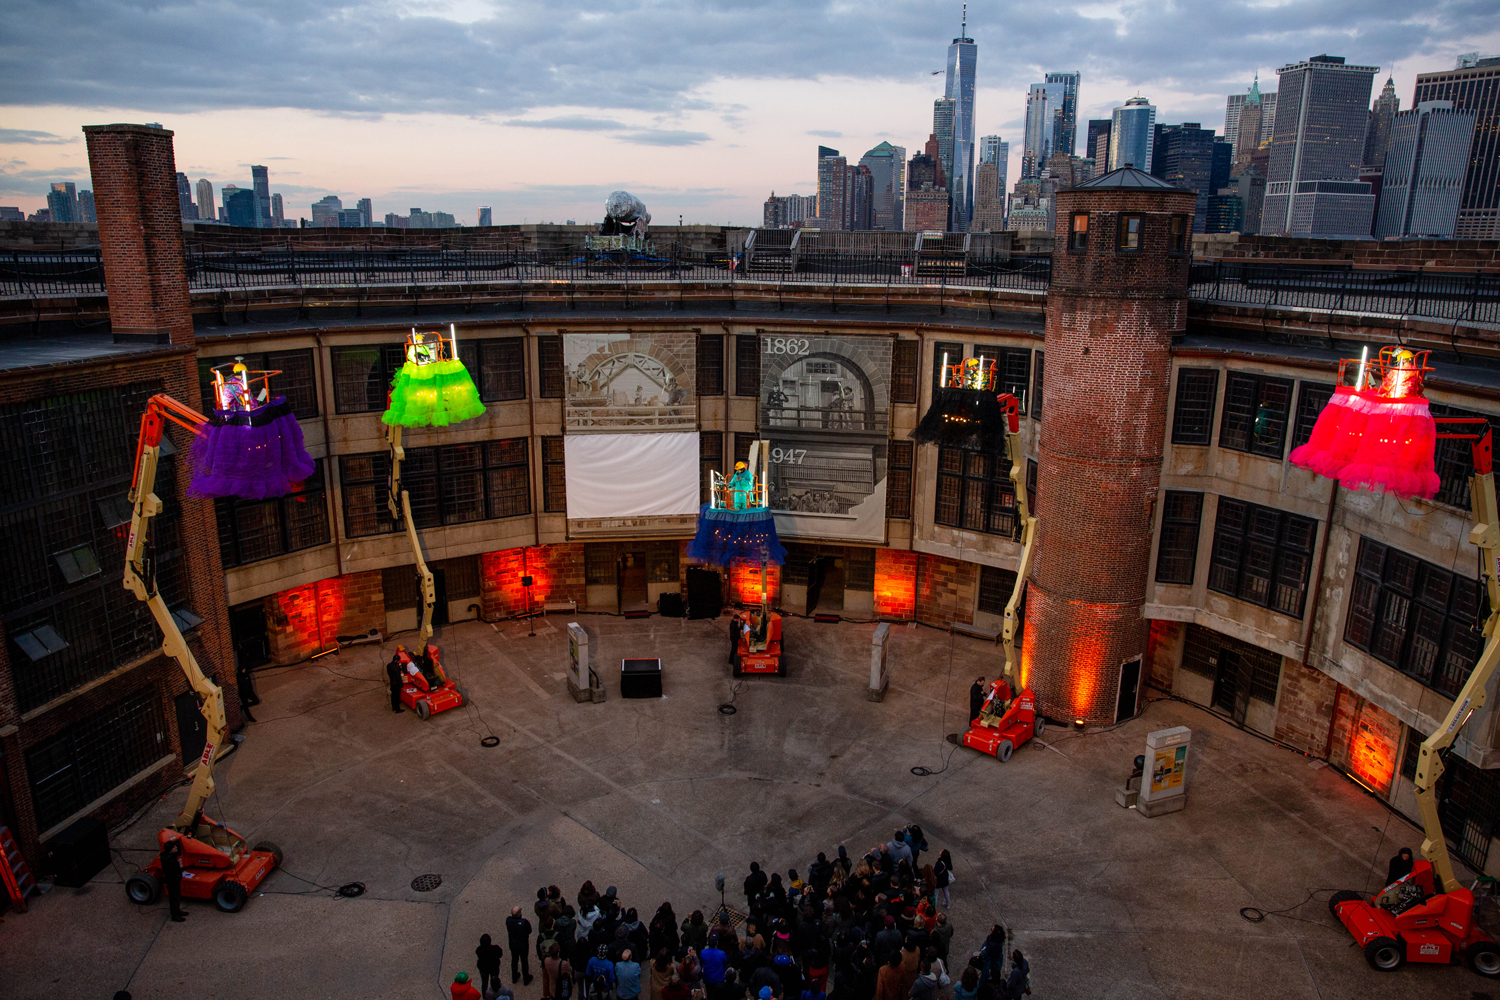 The Performa Biennial Will Return This Fall With an AllOutdoors